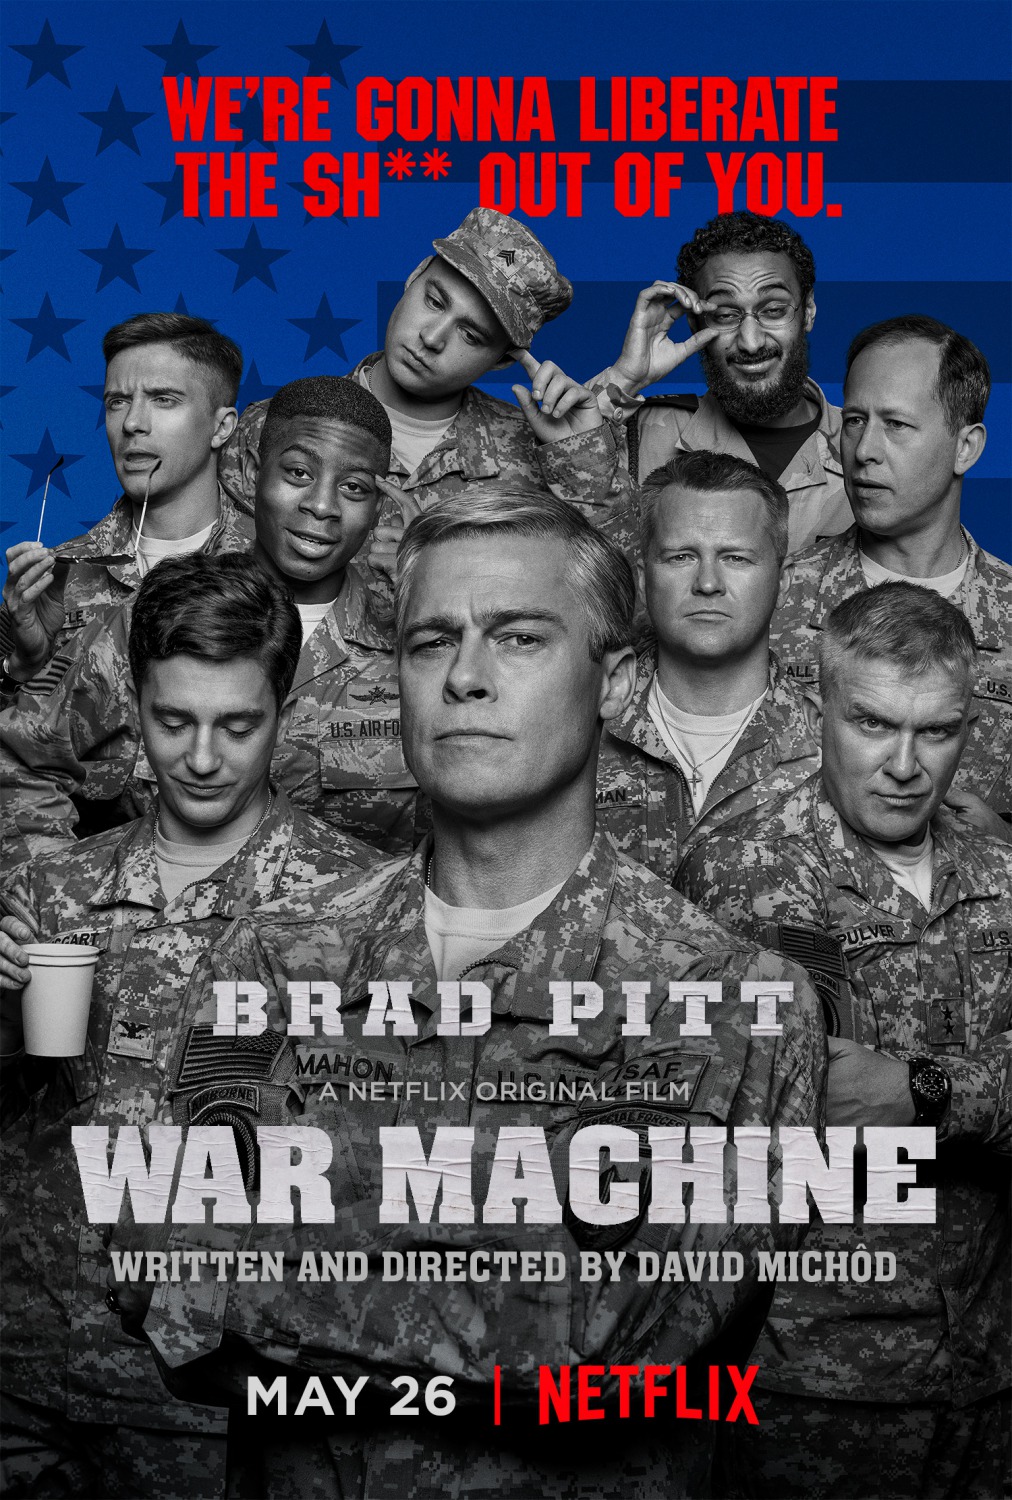 Extra Large TV Poster Image for War Machine 